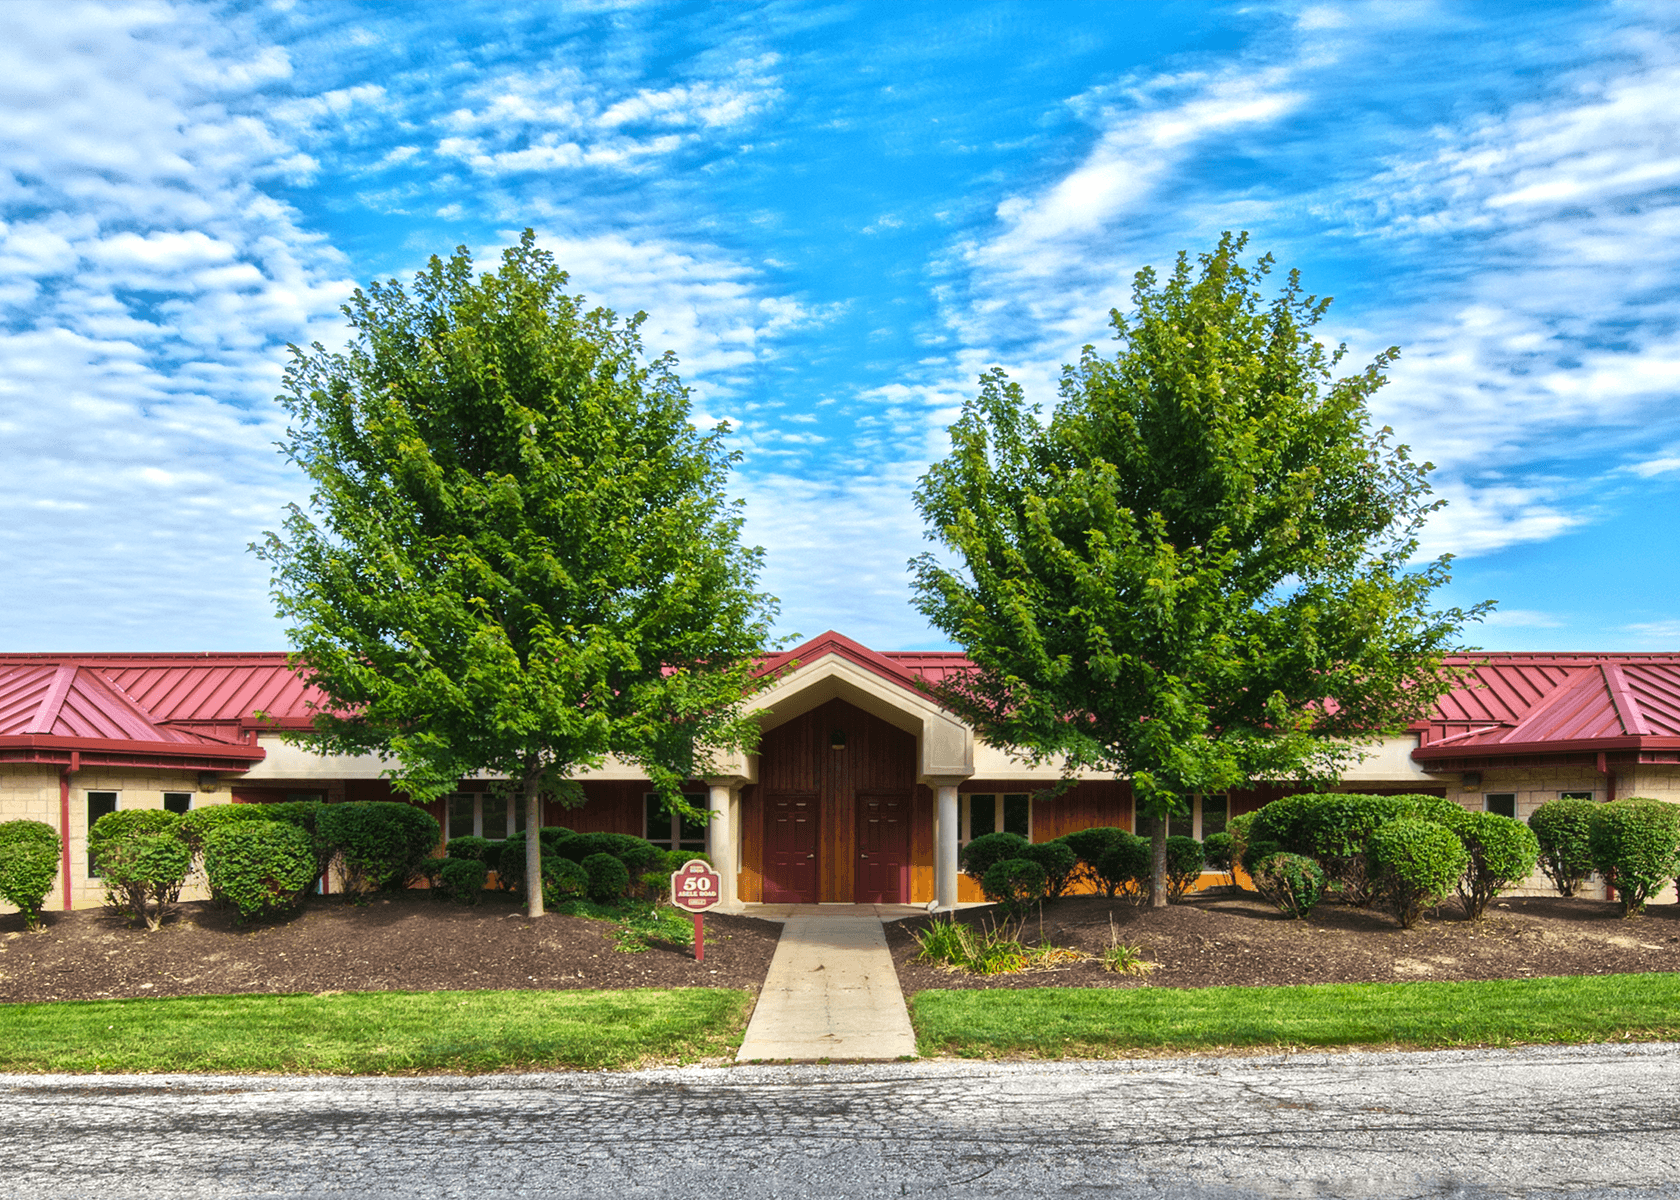 Exterior of a building at Abele Business Park with trees and shrubbery